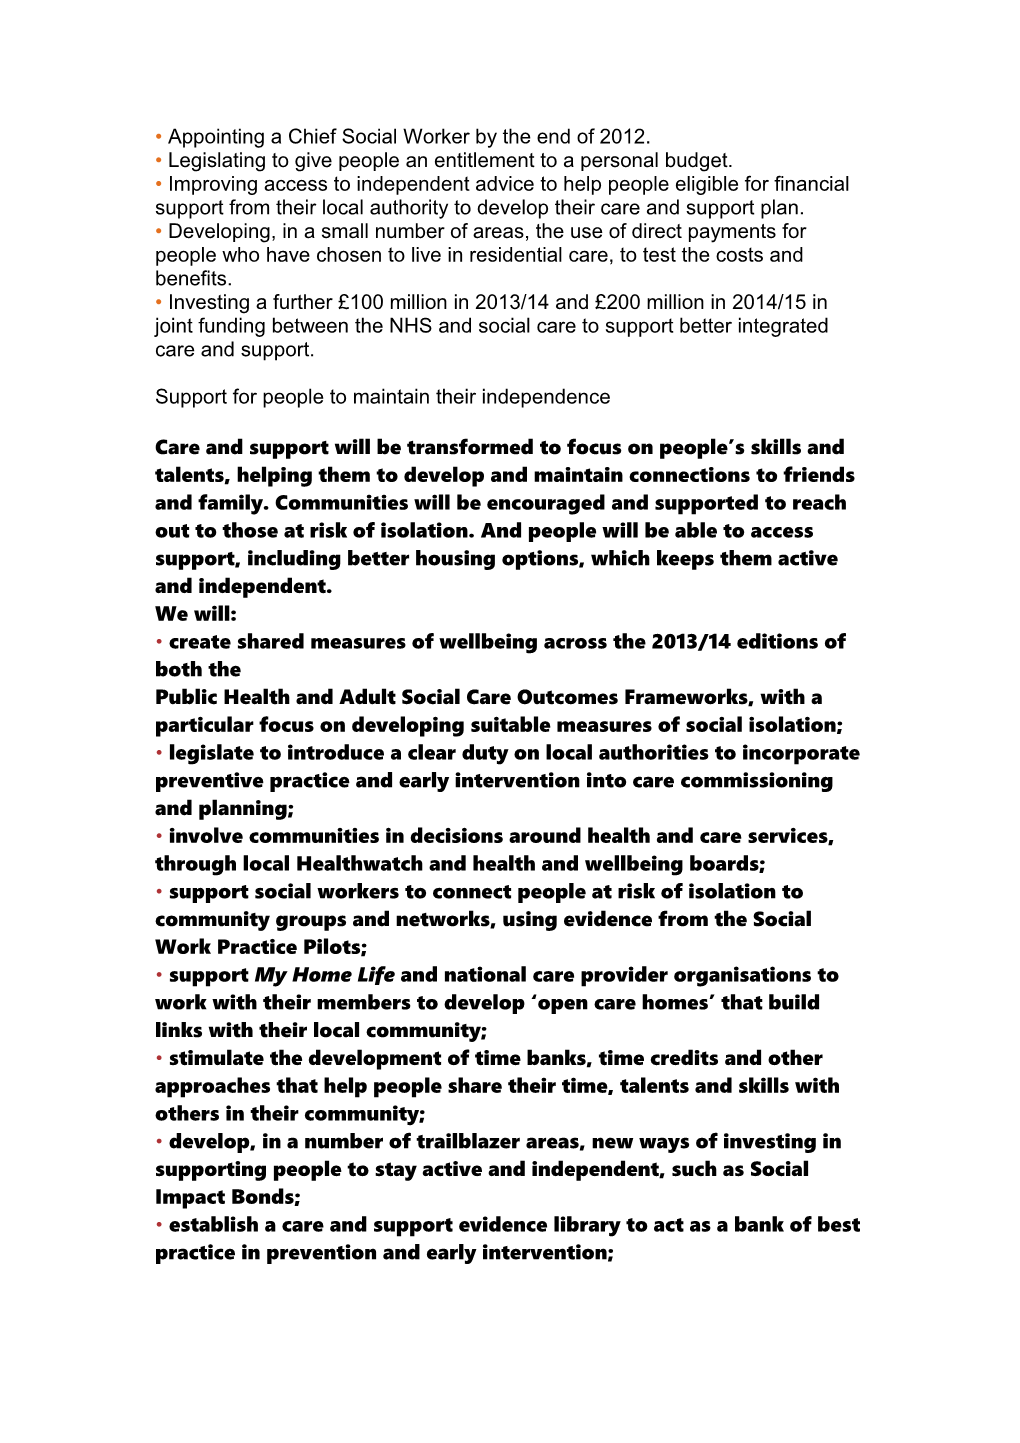 Caring for Our Future Government Social Care White Paper and Draft Bill - Update